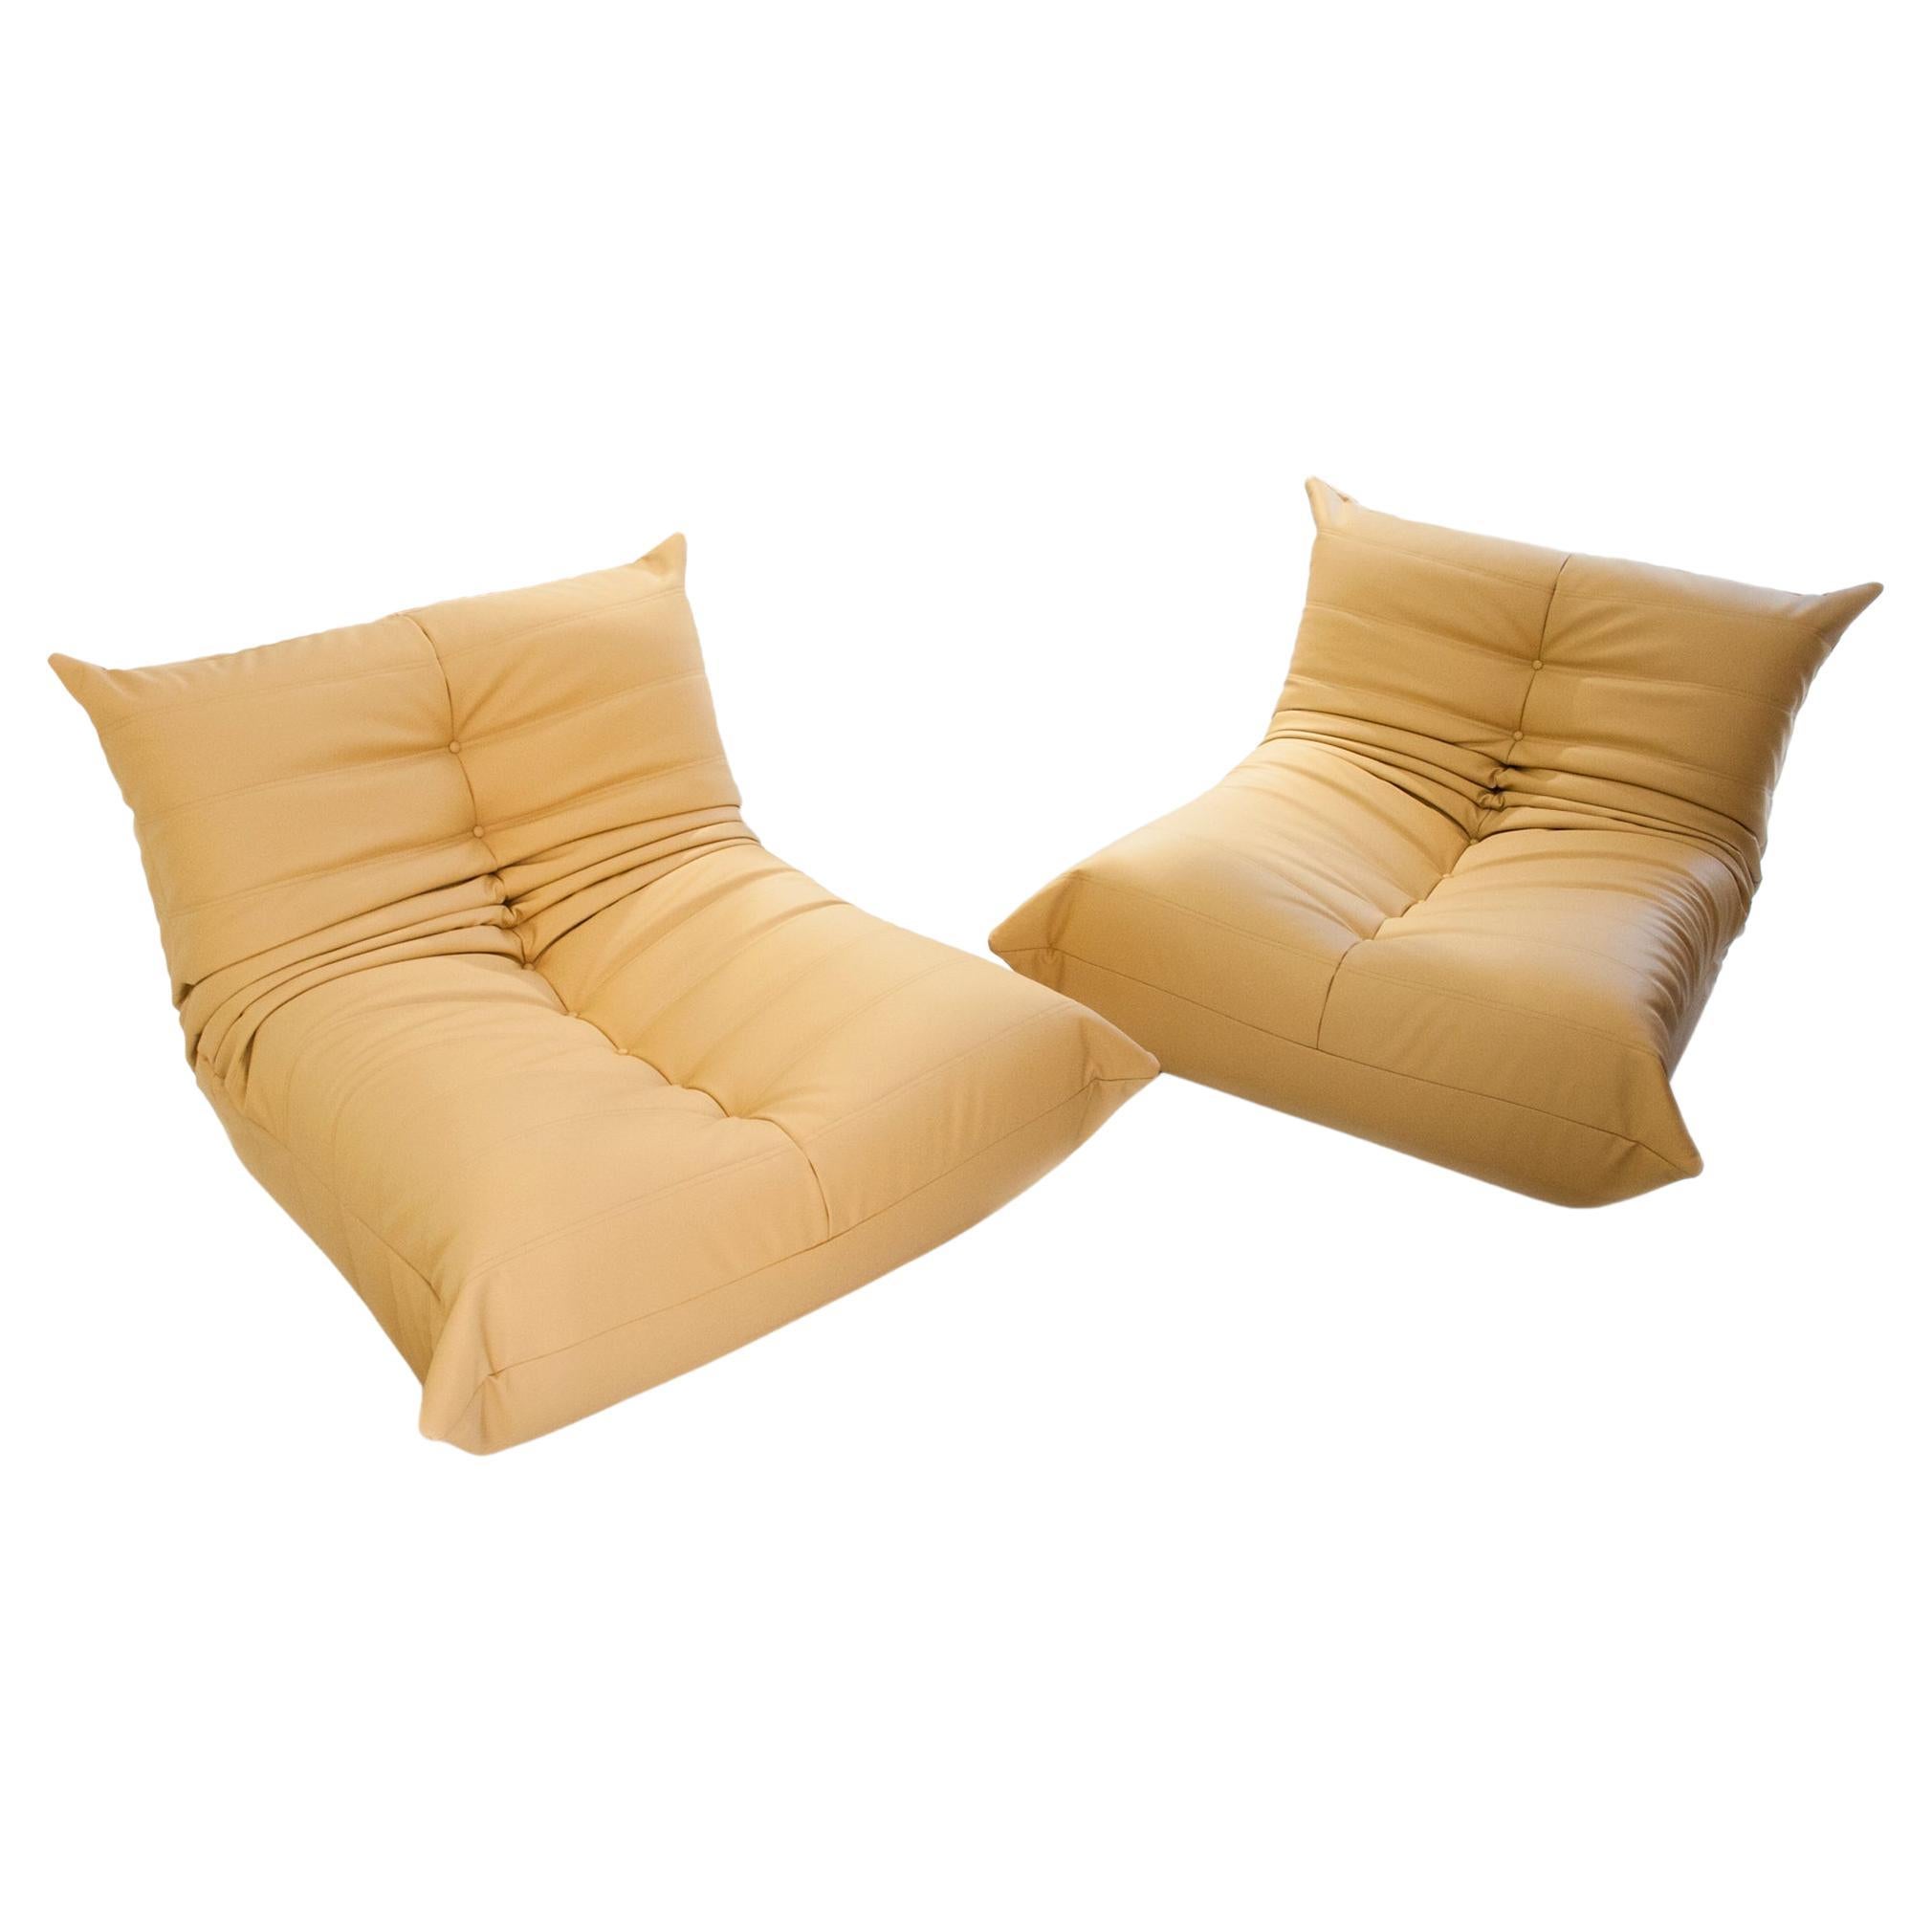 Pair of "Togo" Sofa Designed by Michel Ducaroy, France, 1978